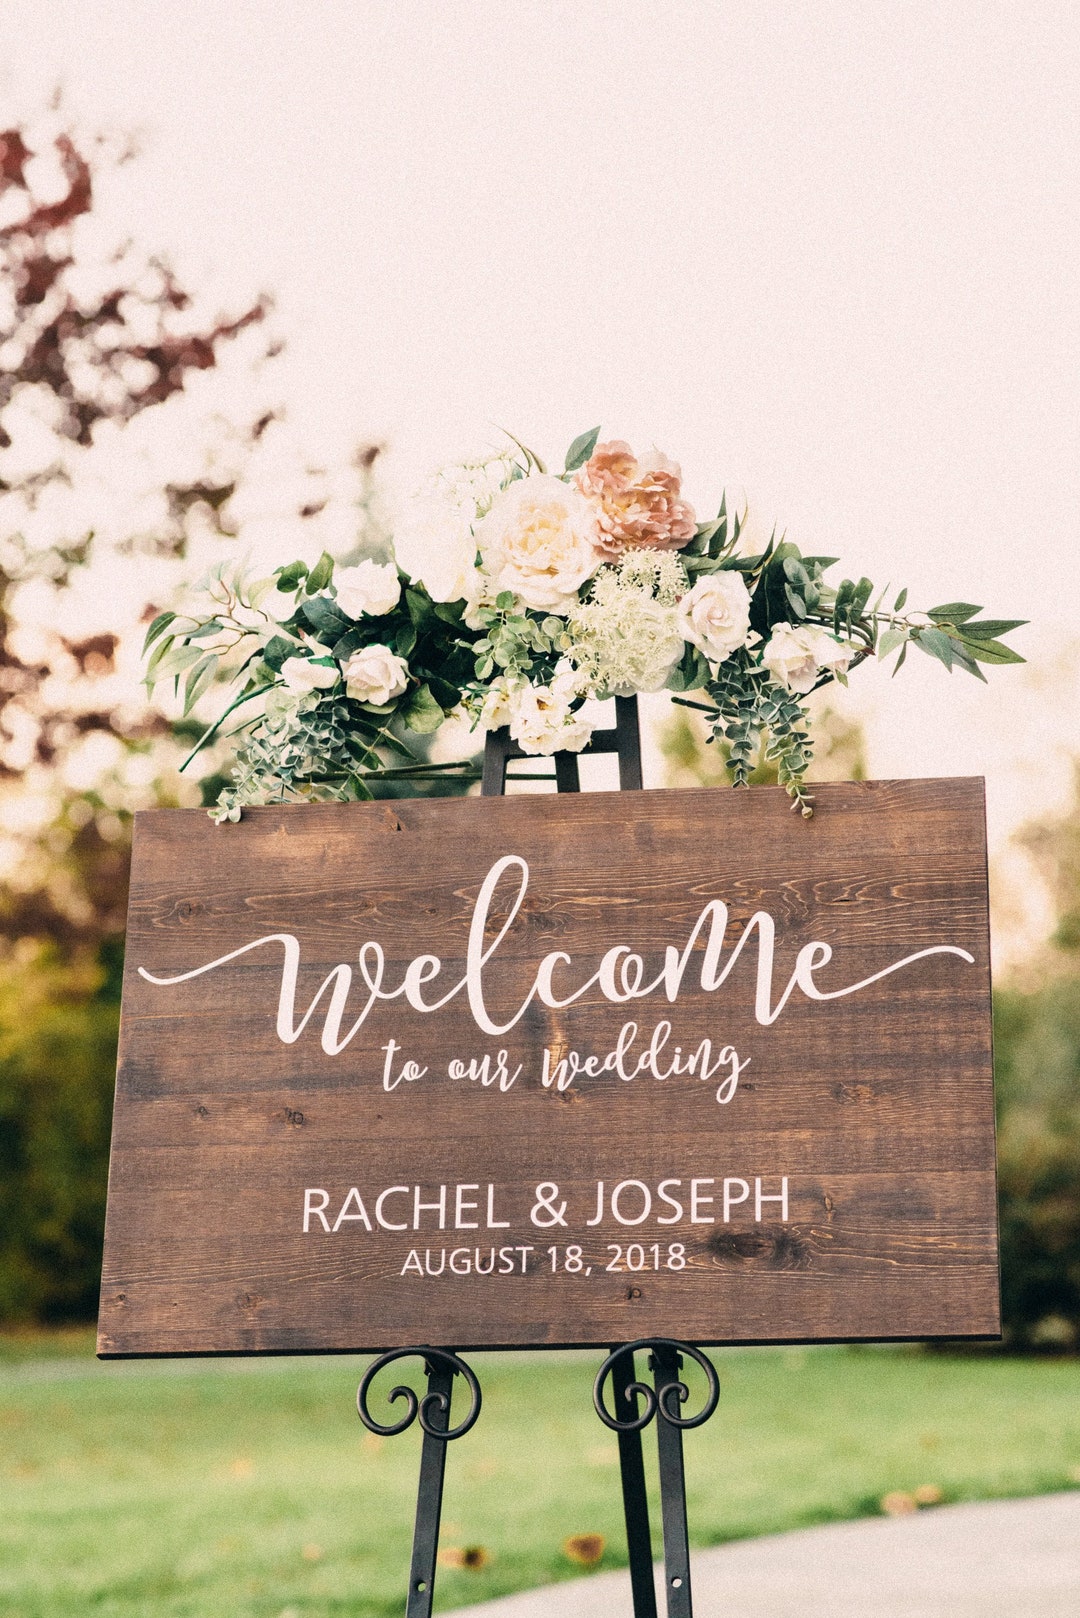  Wooden Easel - Wedding Sign Stand - Floor Easel For Welcome Sign  - Large Art Display - Event Signage Holder (68 tall) : Handmade Products